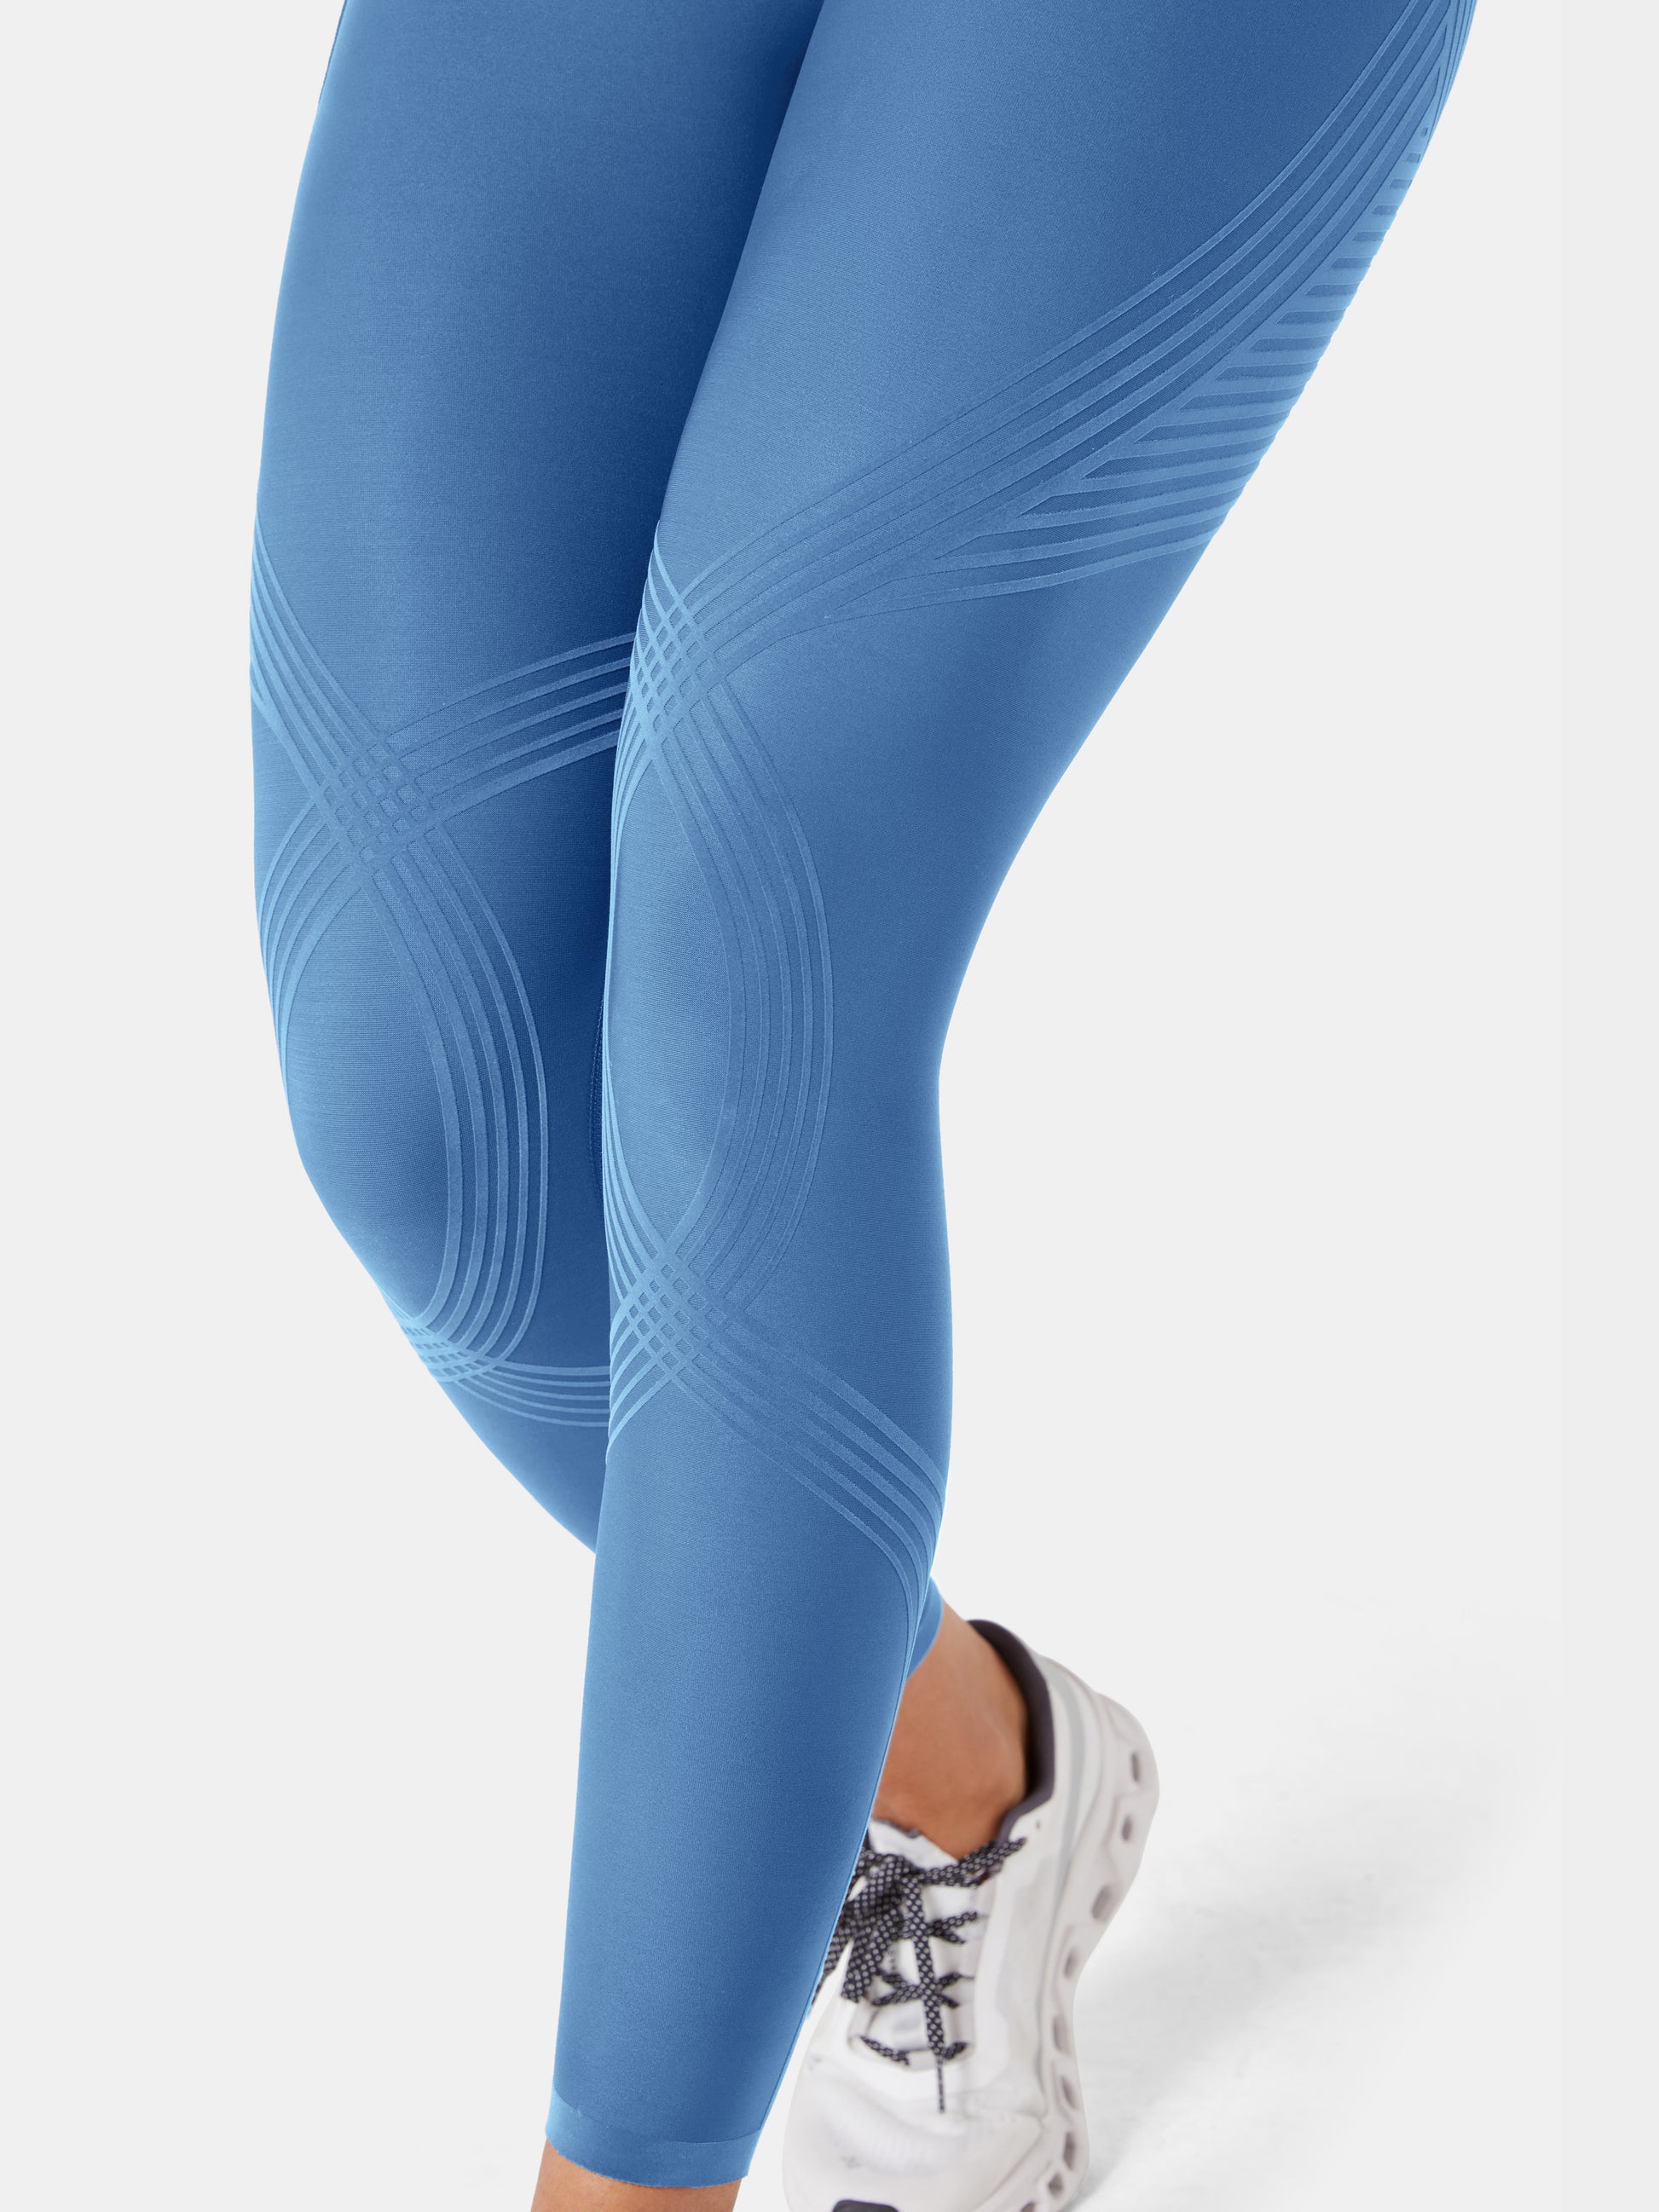 Arcaa - Versatile movement, our ribbed Mya leggings now available